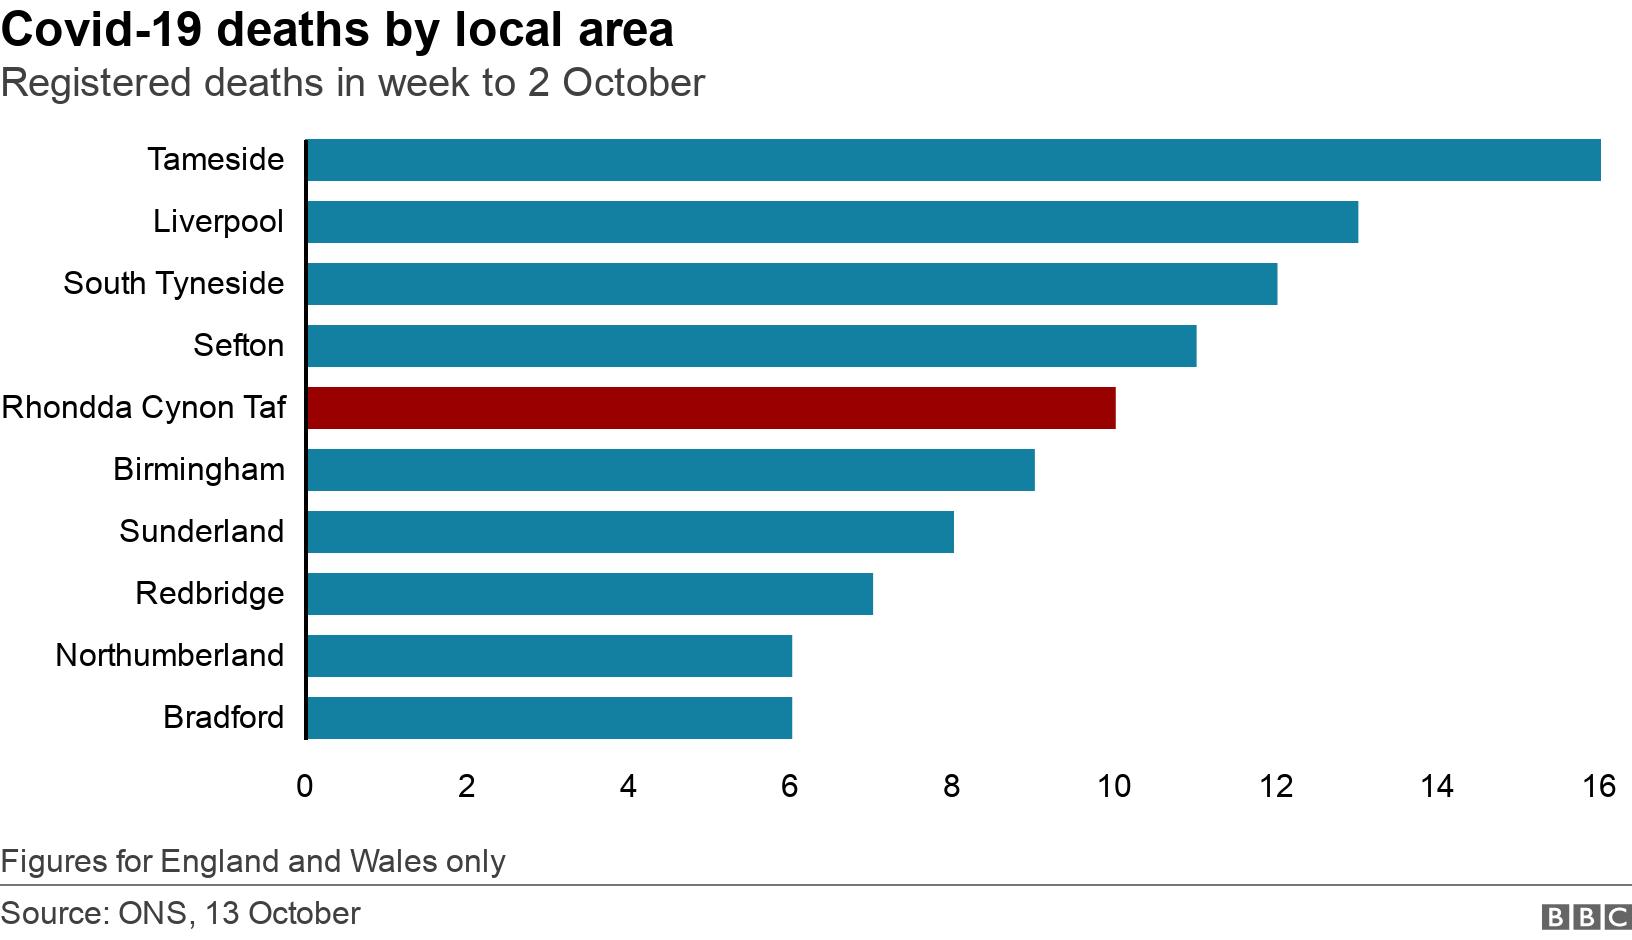 Covid-19 deaths by local area. Registered deaths in week to 2 October. Figures for England and Wales only.